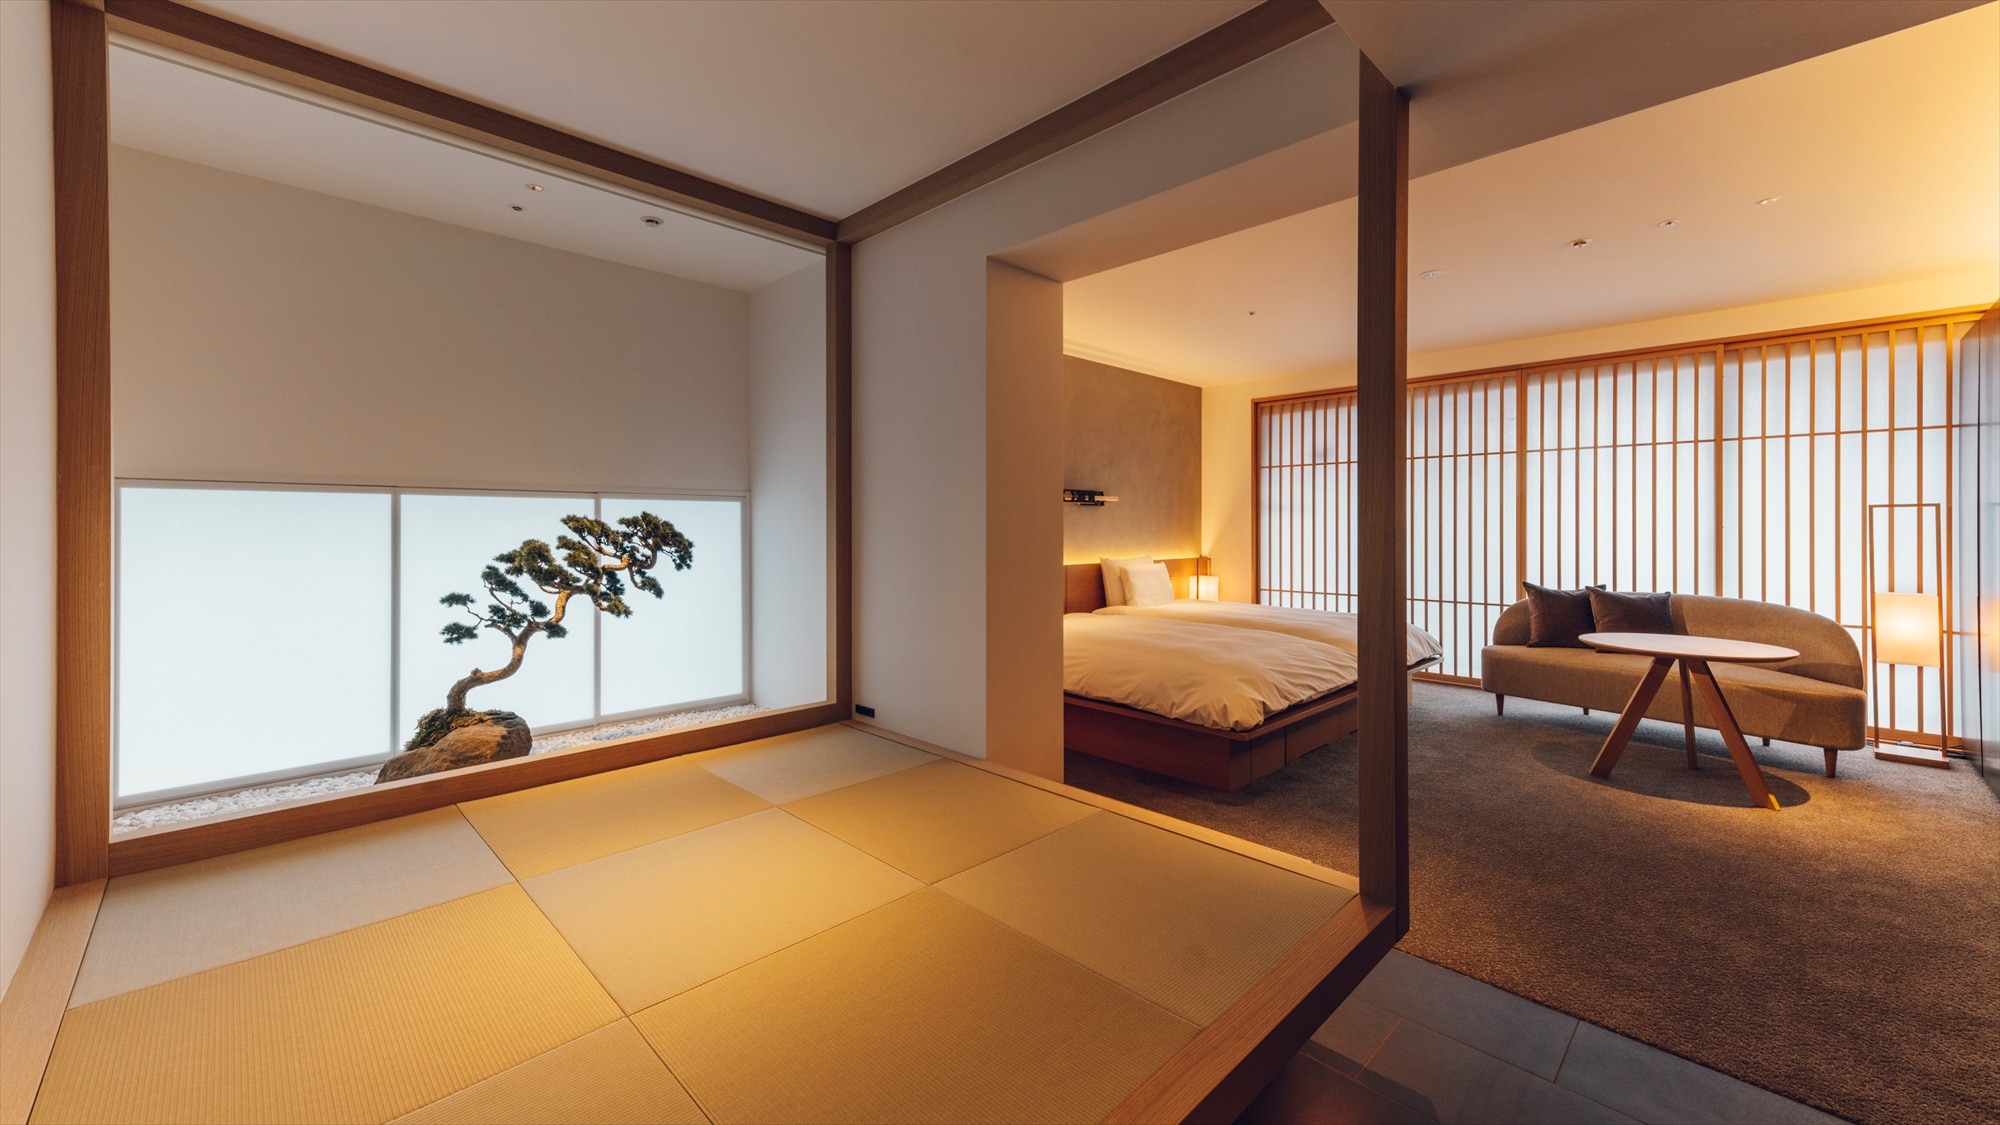 Tsuboniwa Suite / You can stay with a futon on tatami mats.